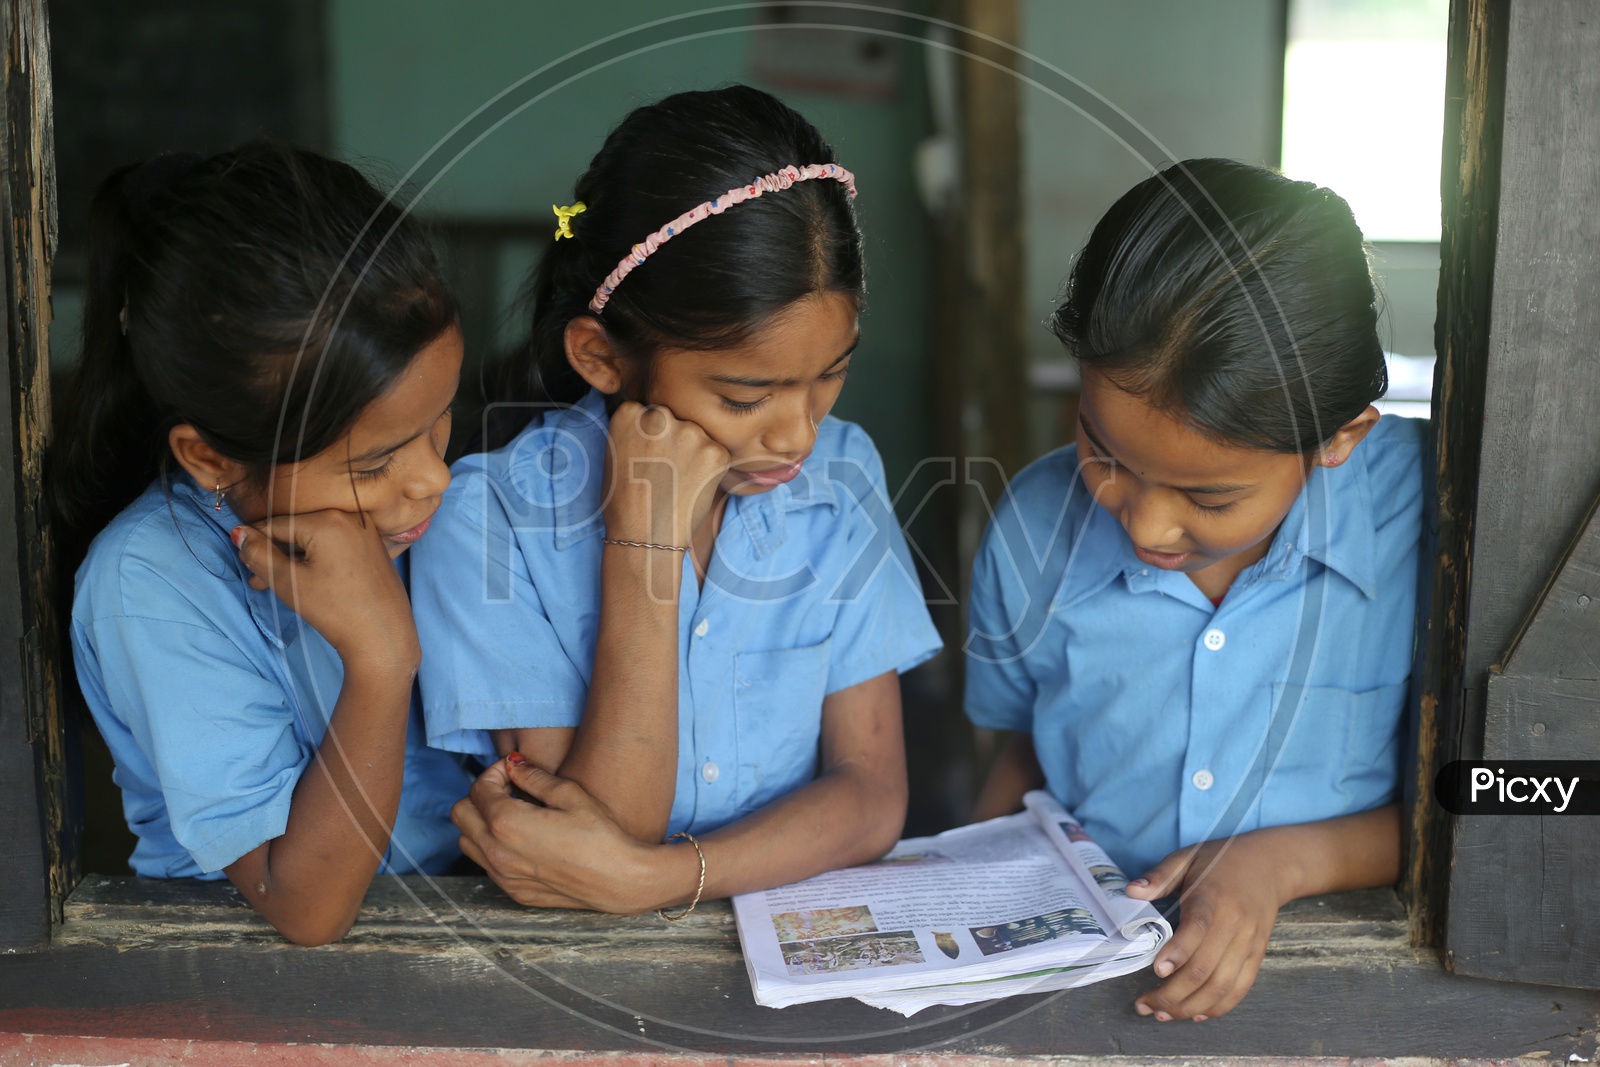 School Students Or School Children Wearing The Uniform And Listening To Class in a Classroom